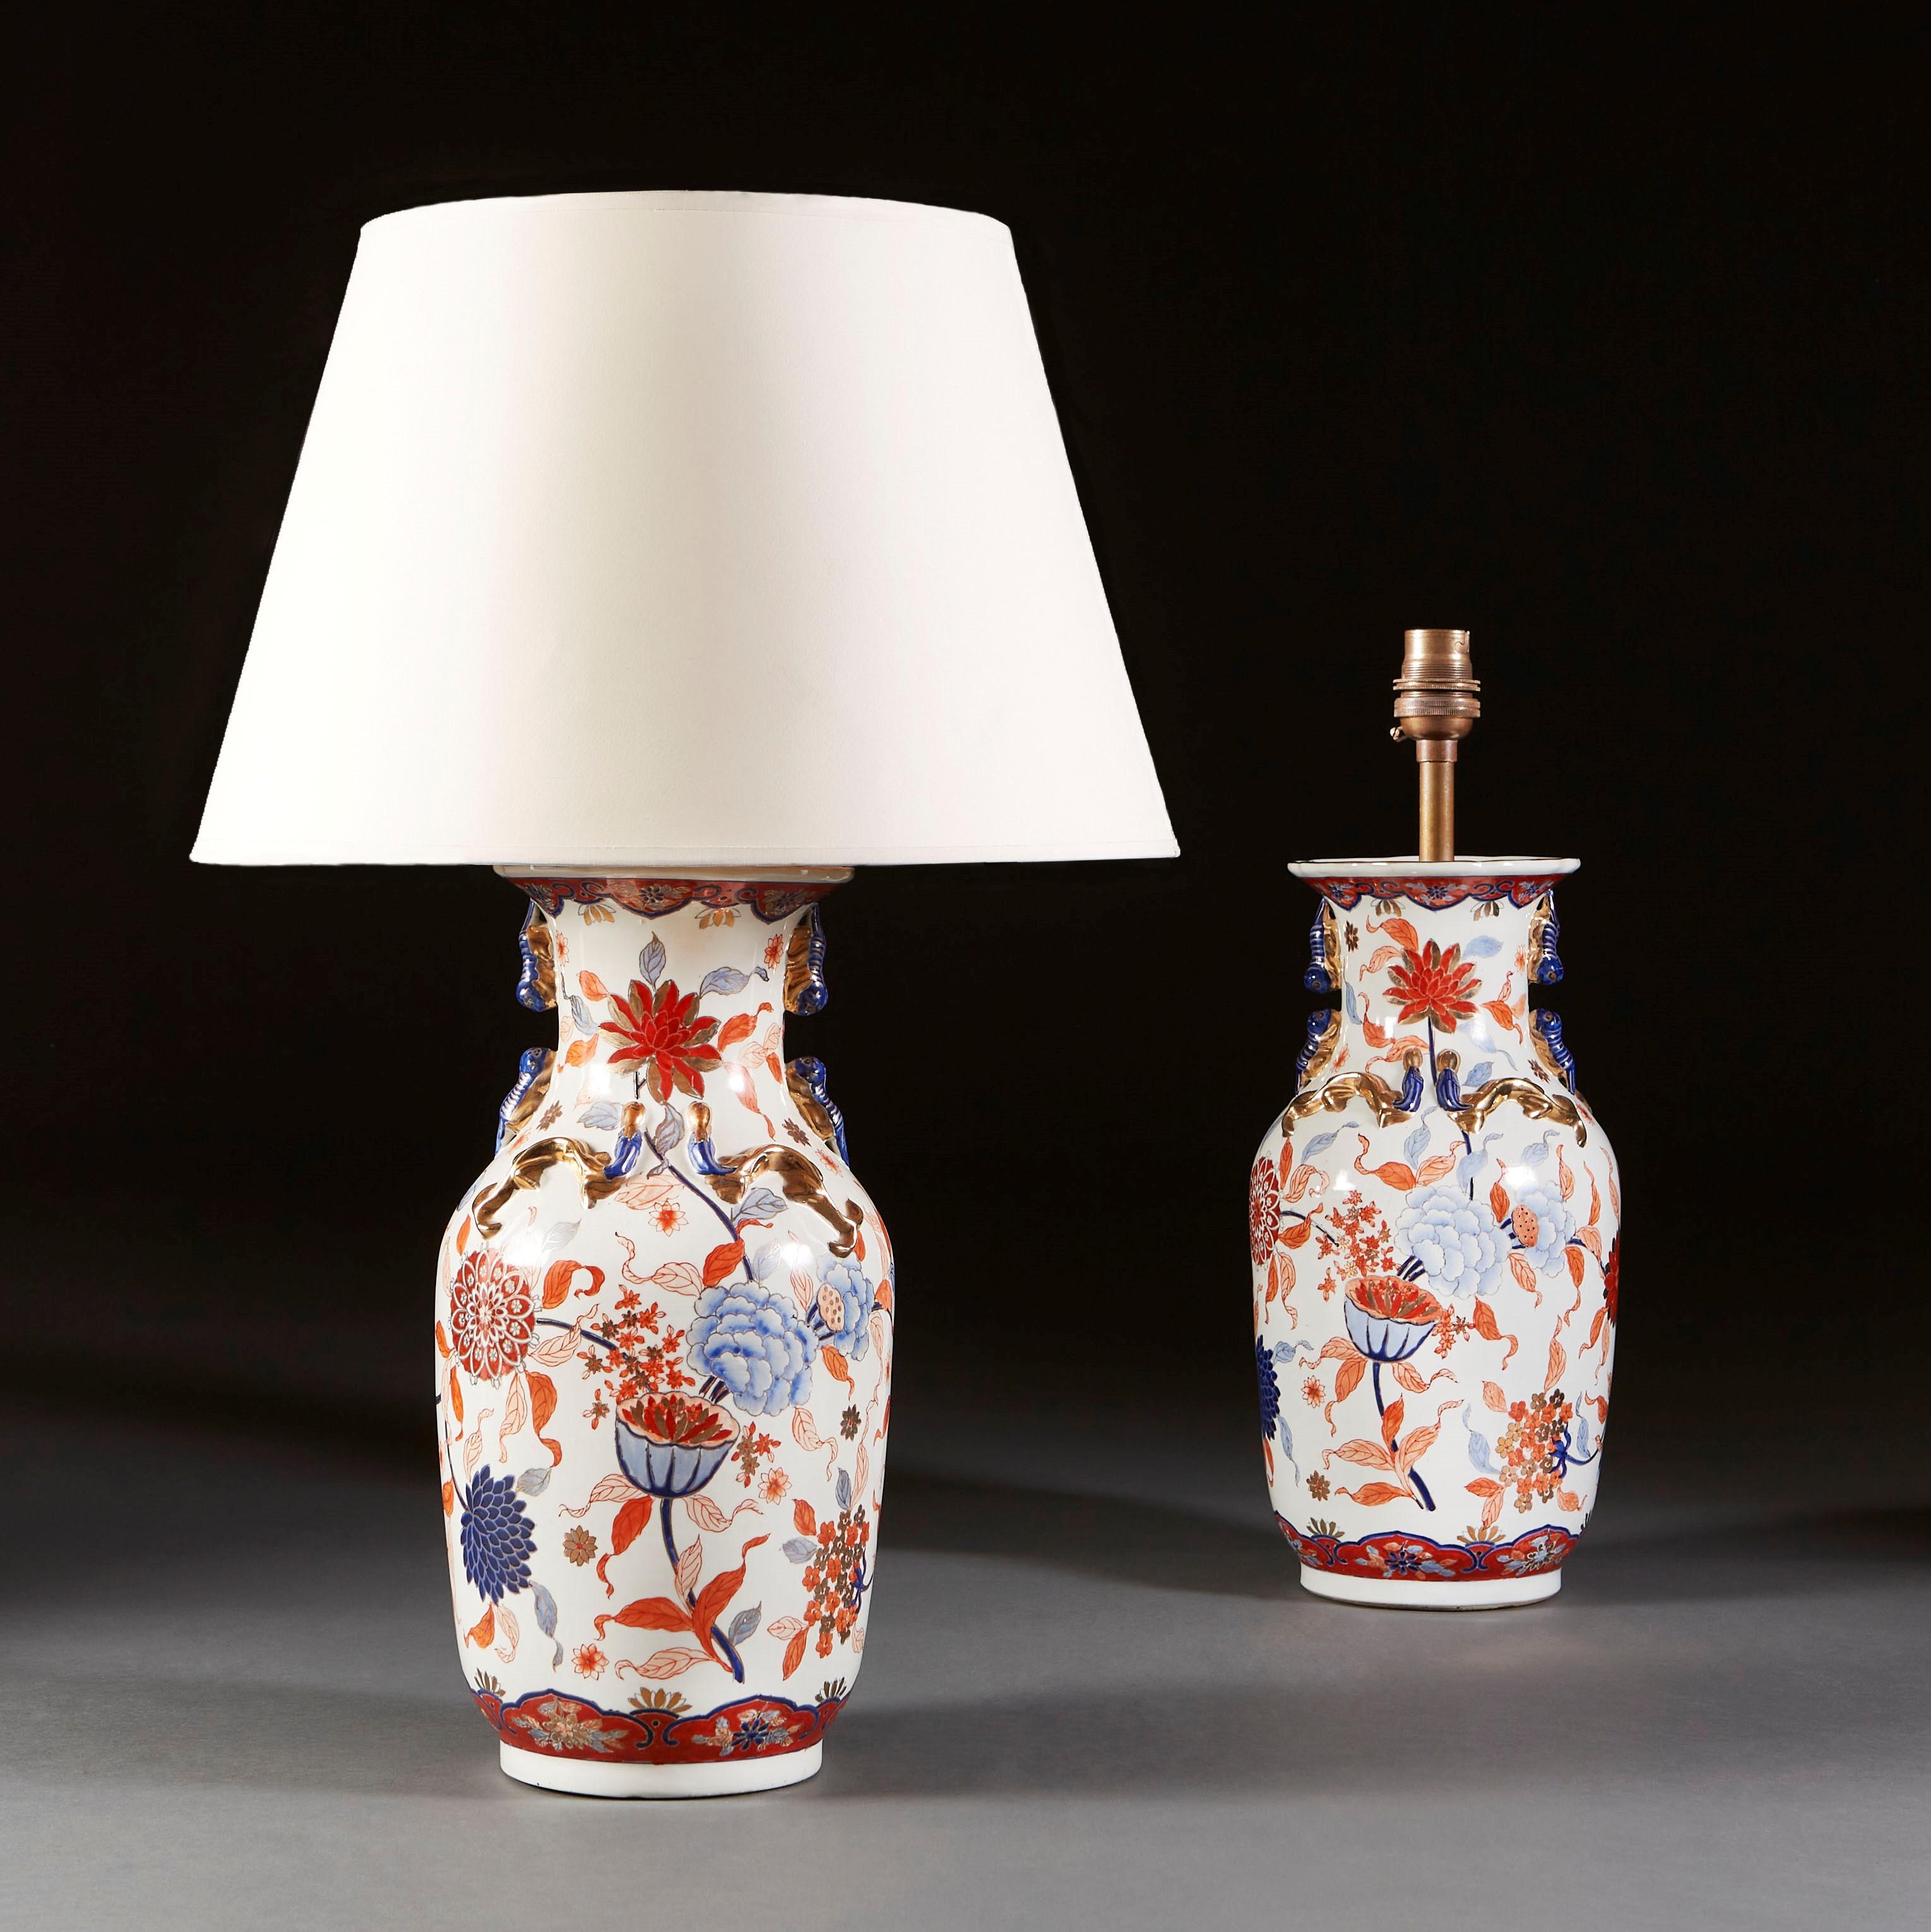 A large pair of late nineteenth century Japanese Imari vases, decorated throughout with tropical flora, with chrysanthemums and orchids in red and blue glaze on a white ground, the necks with dragon handles and scrolls, now as lamps.

Currently